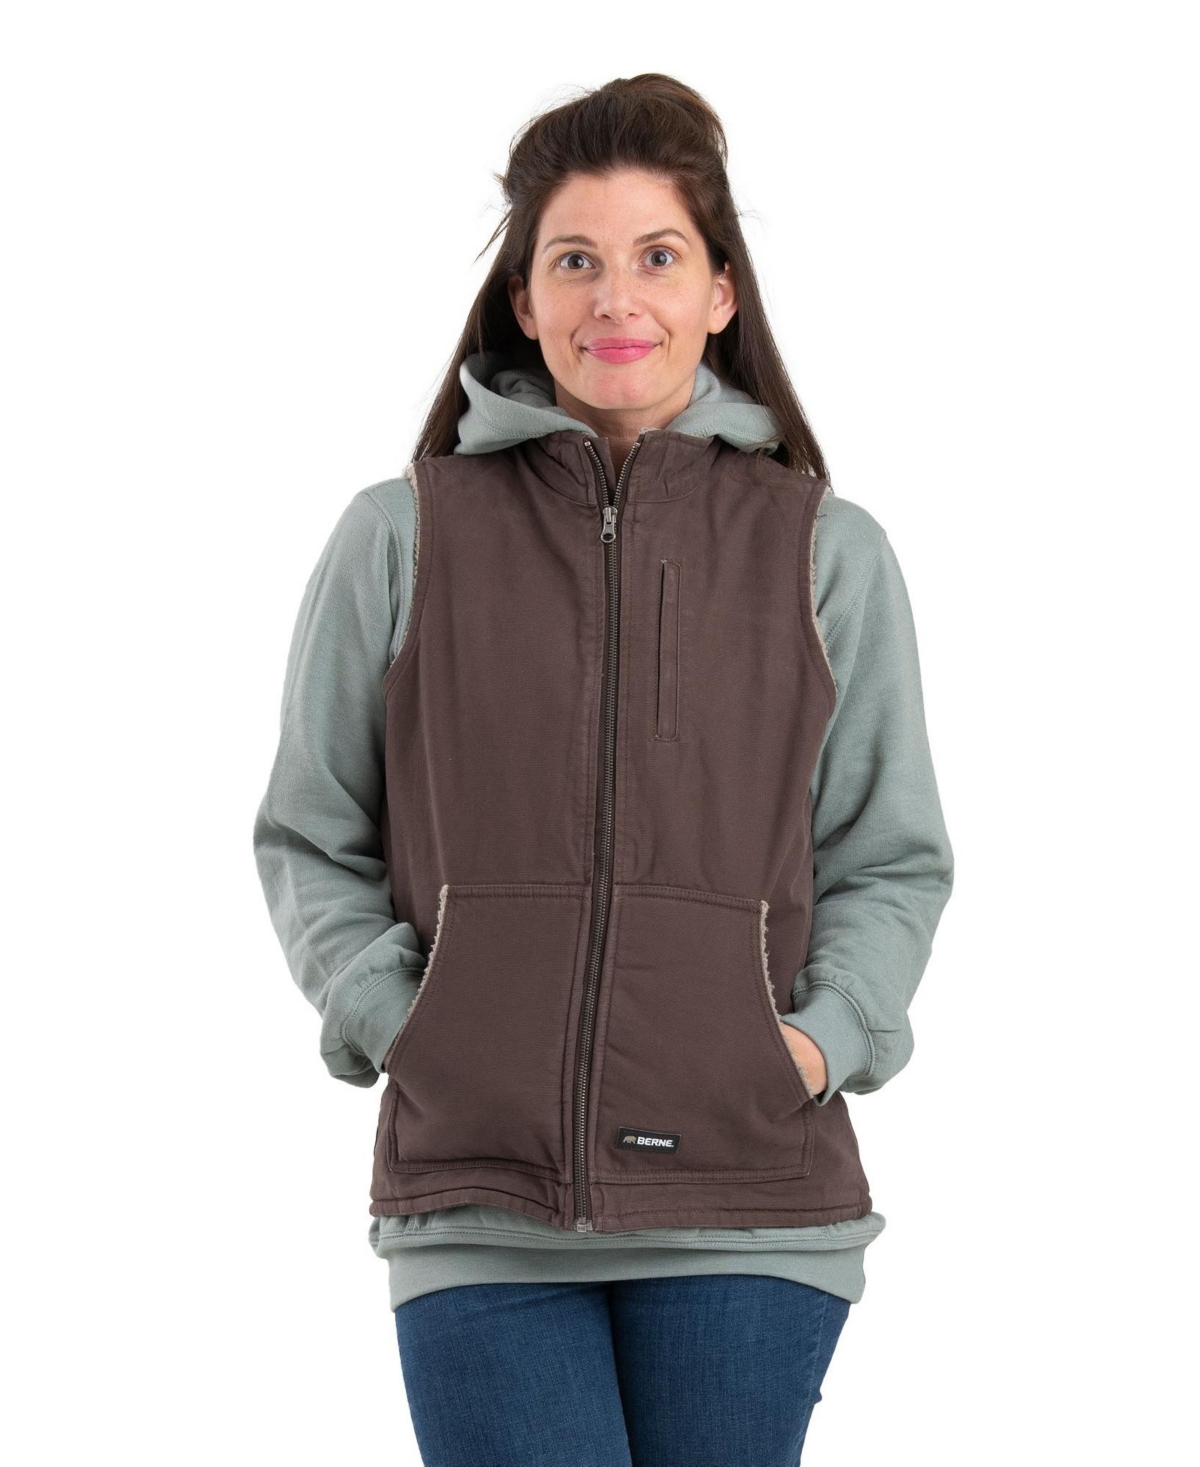 Women's Lined Softstone Duck Vest - Tuscan